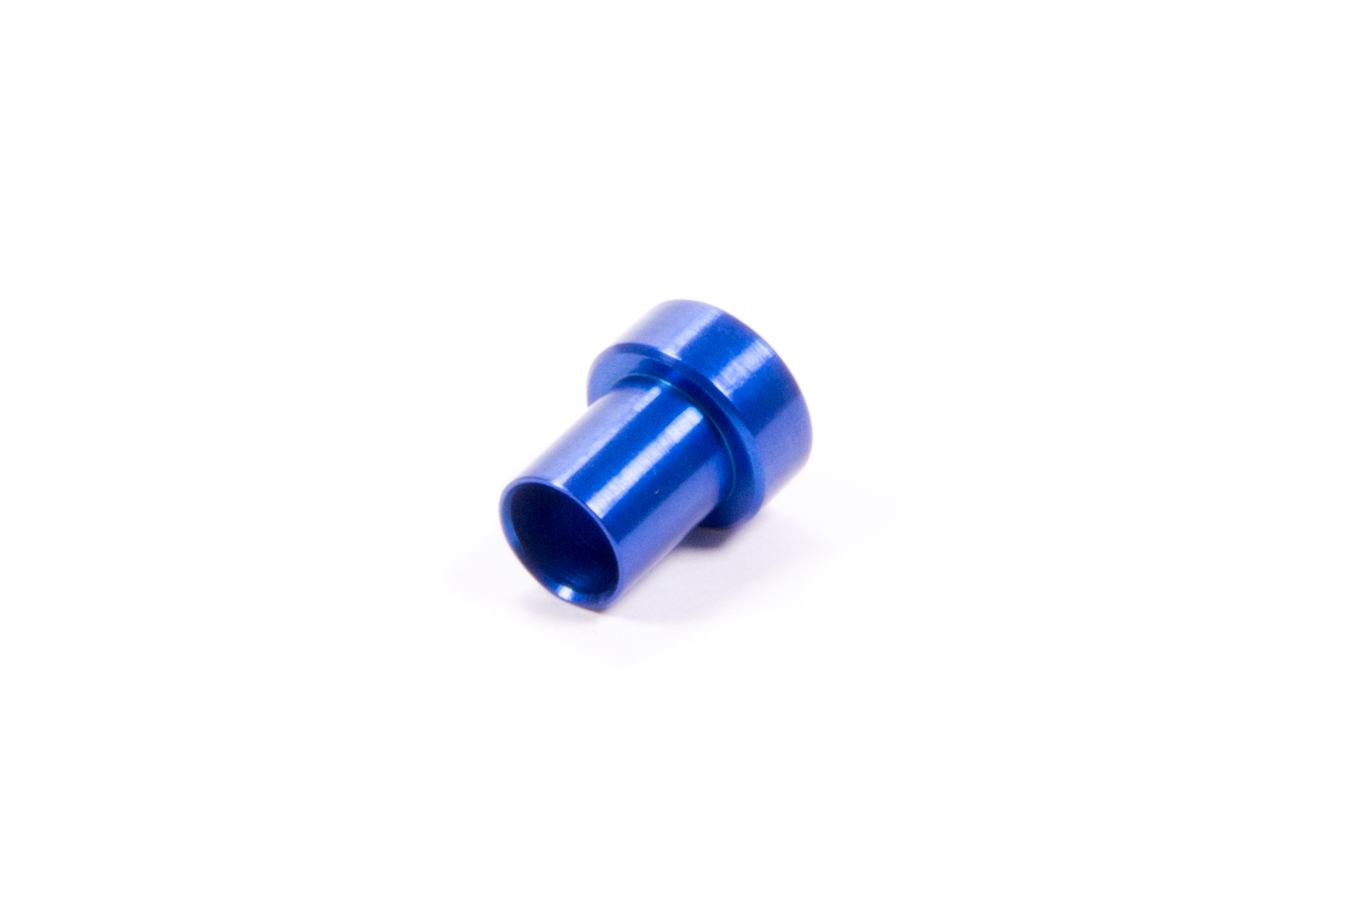 NOS 17600 Fitting, Tube Sleeve, 3 AN, 3/16 in Tube, Aluminum, Blue Anodized, Each